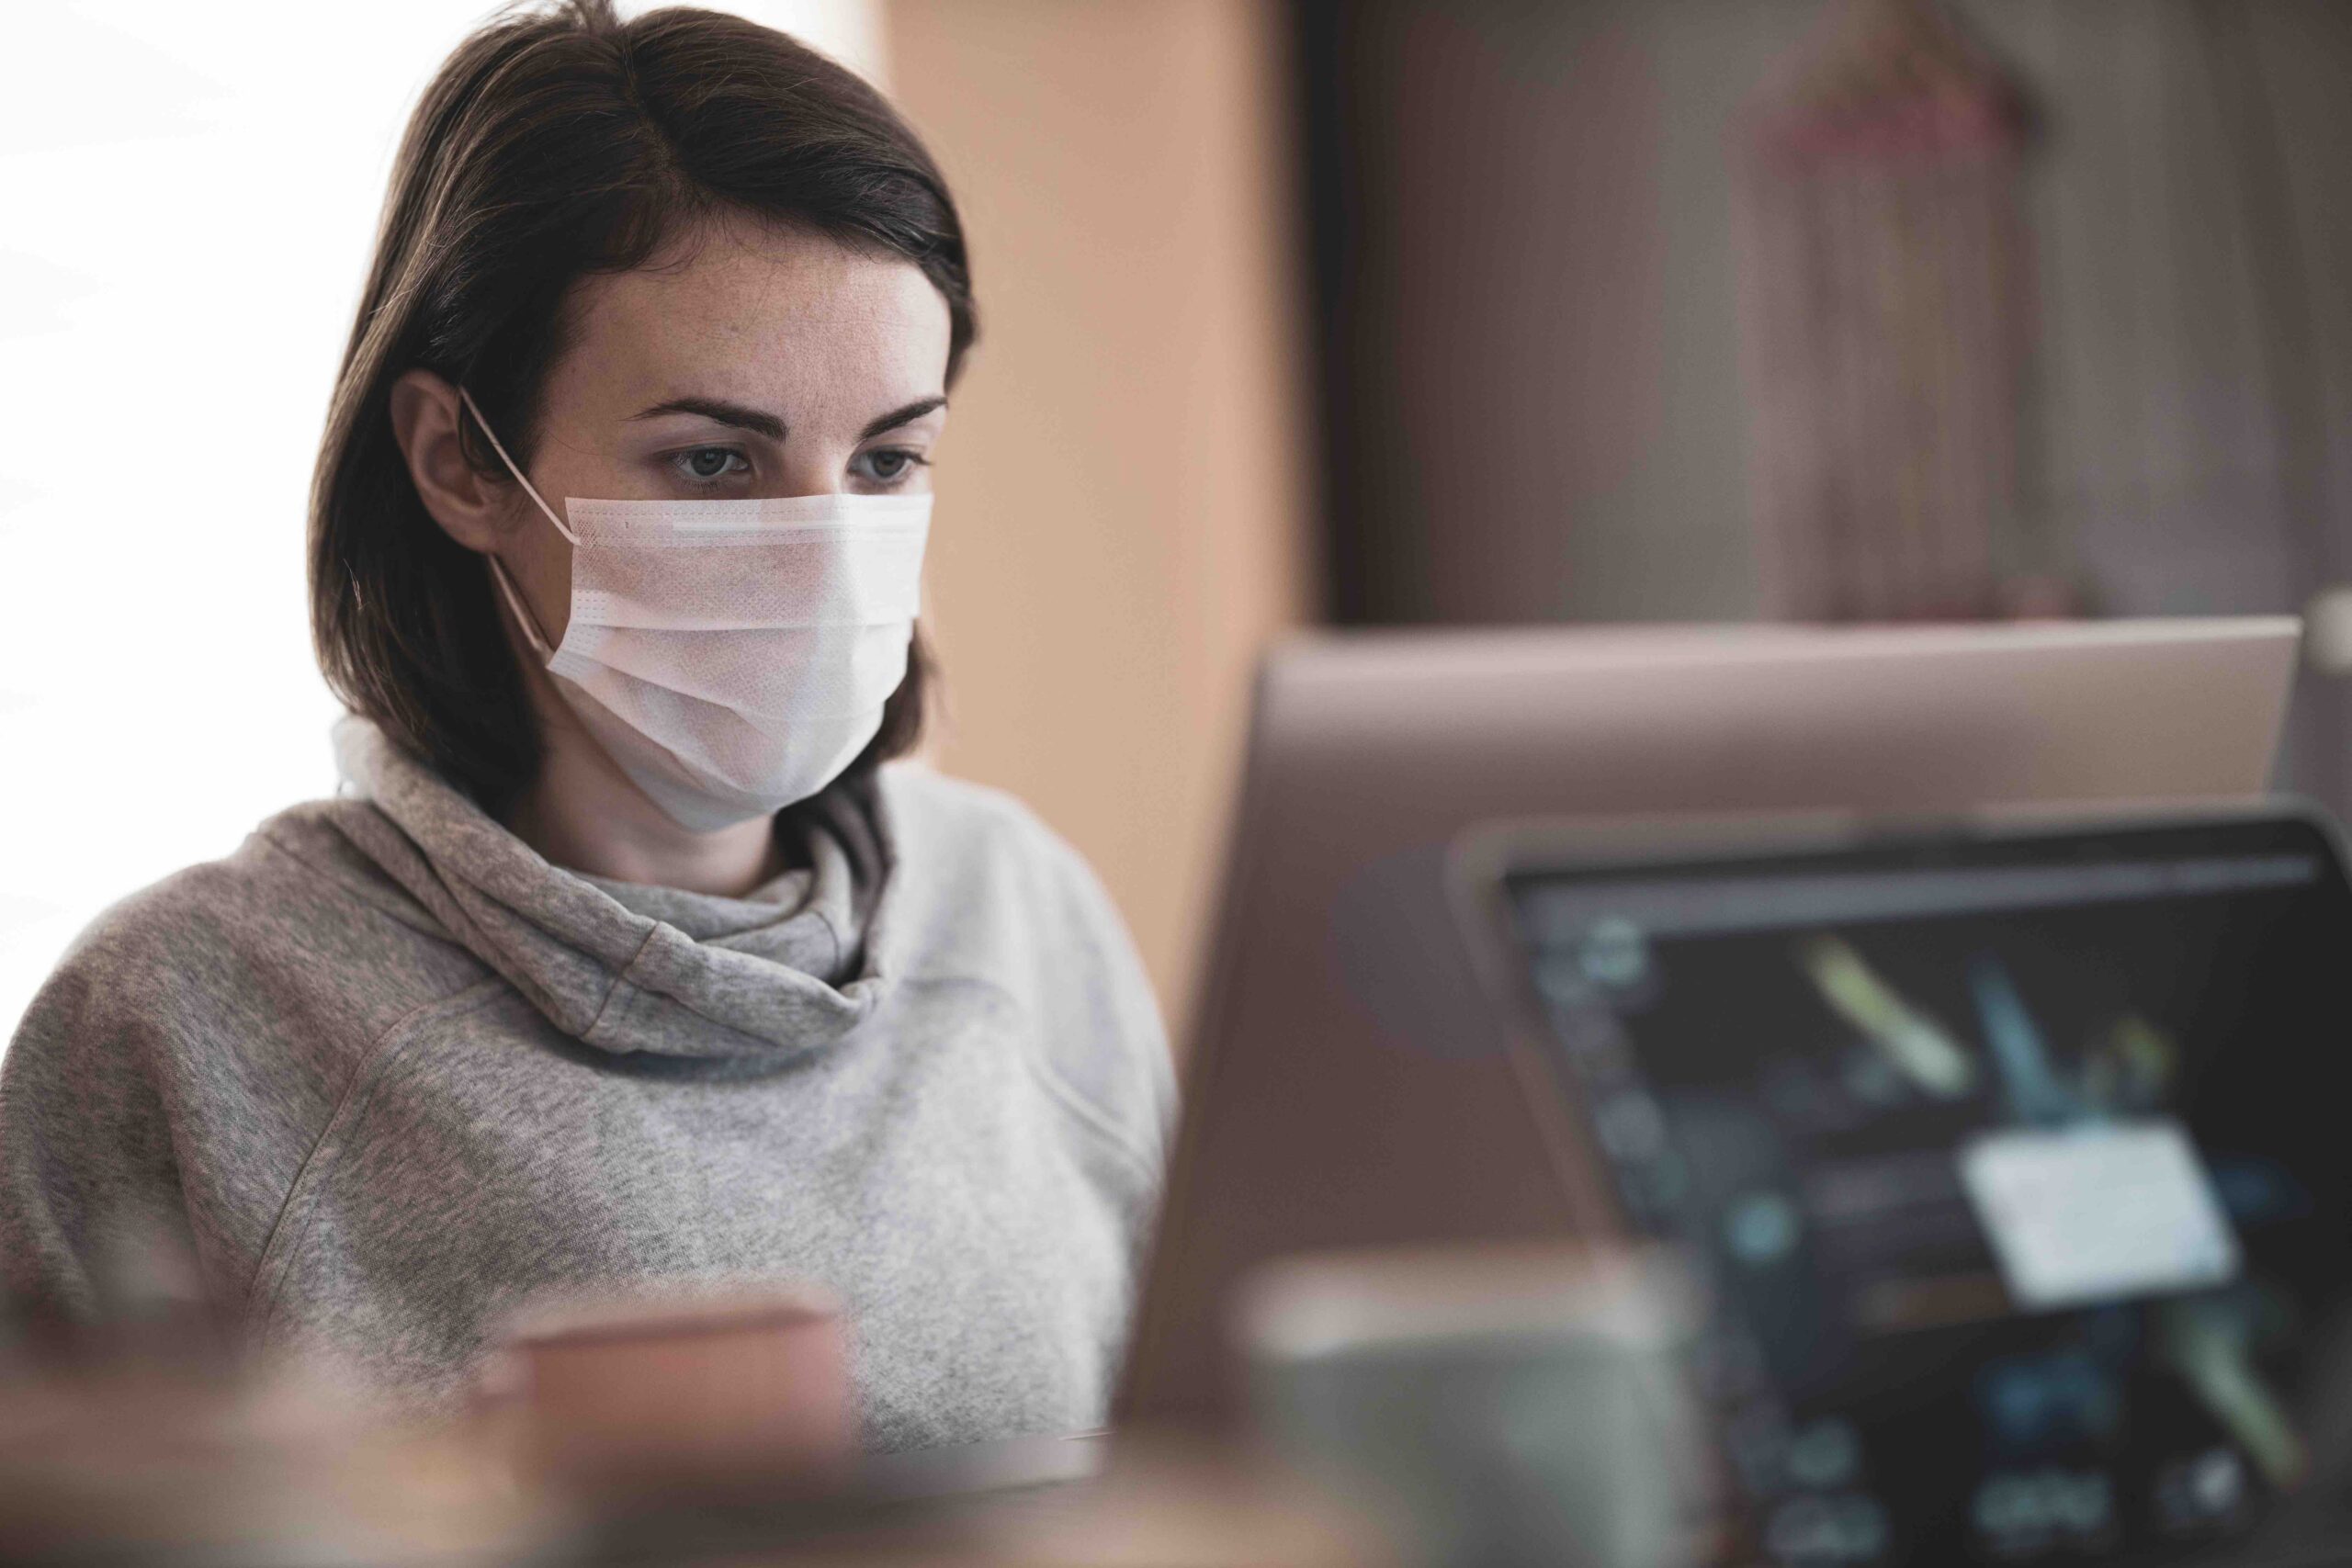 College, COVID, and Eating Disorders [Image description: woman with mask in front of computer] represents a potential college student with an eating disorder having online therapy in California